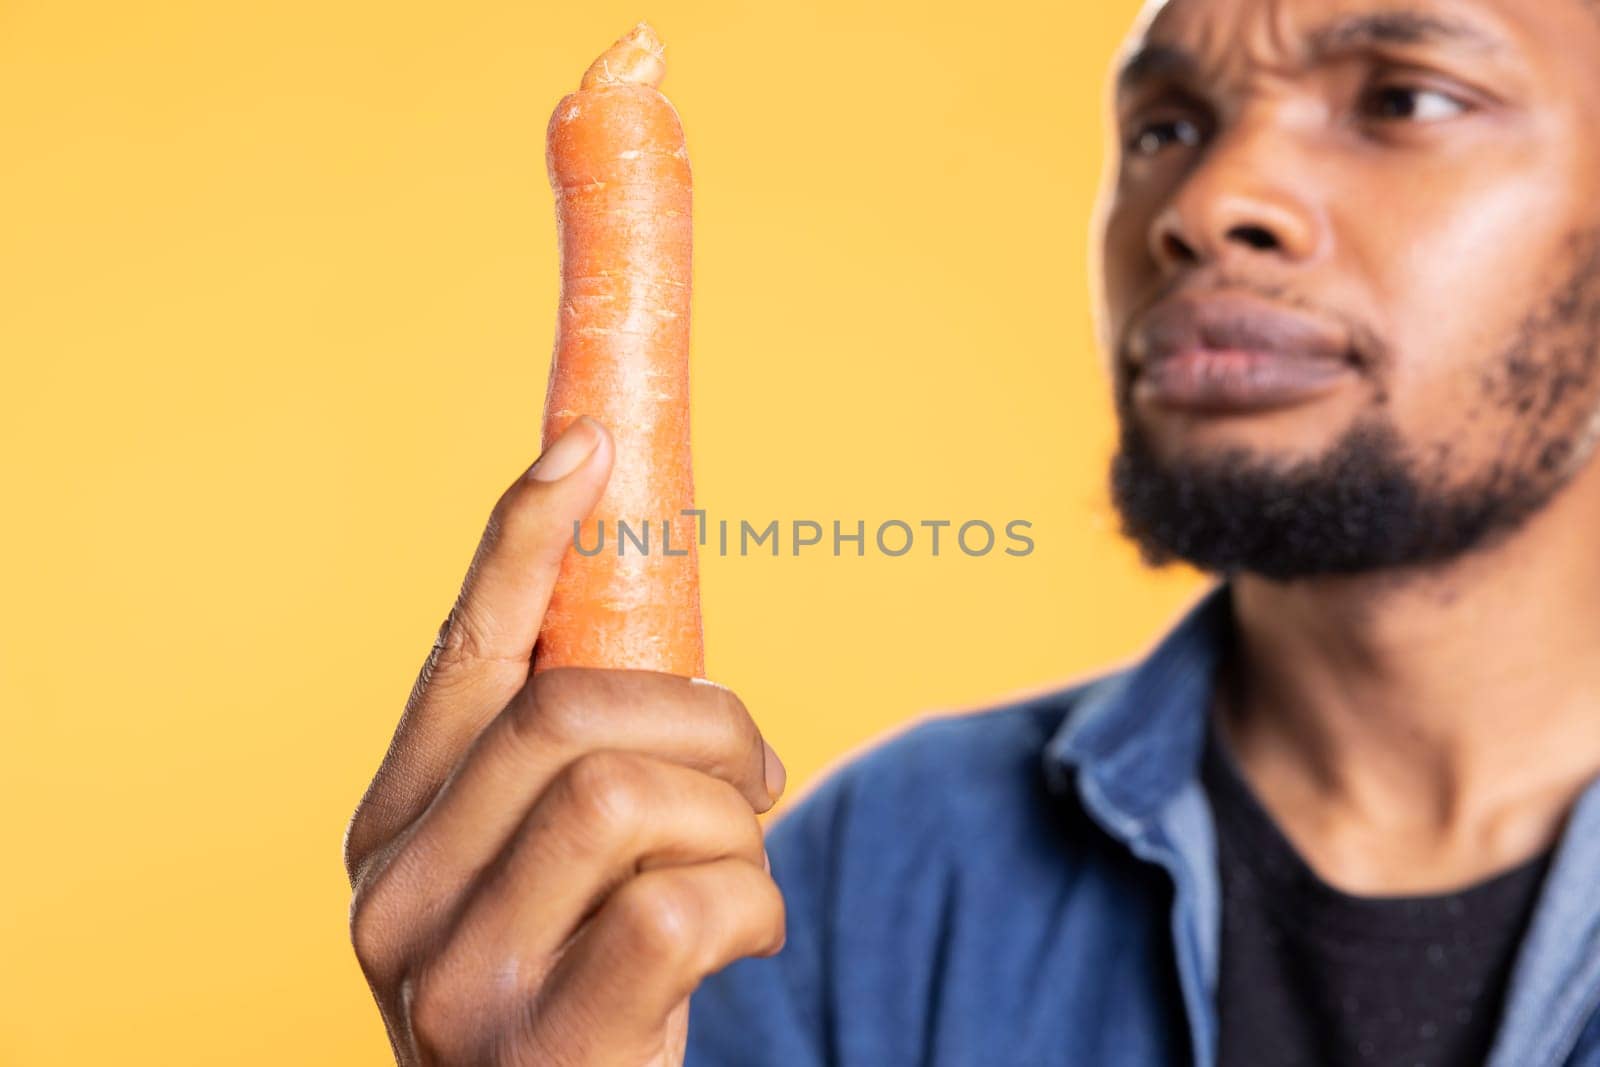 African american guy in doubt inspecting an organic carrot, looking intensely at additives free freshly harvested vegetable. Young person examining natural locally grown veggie, zero waste.